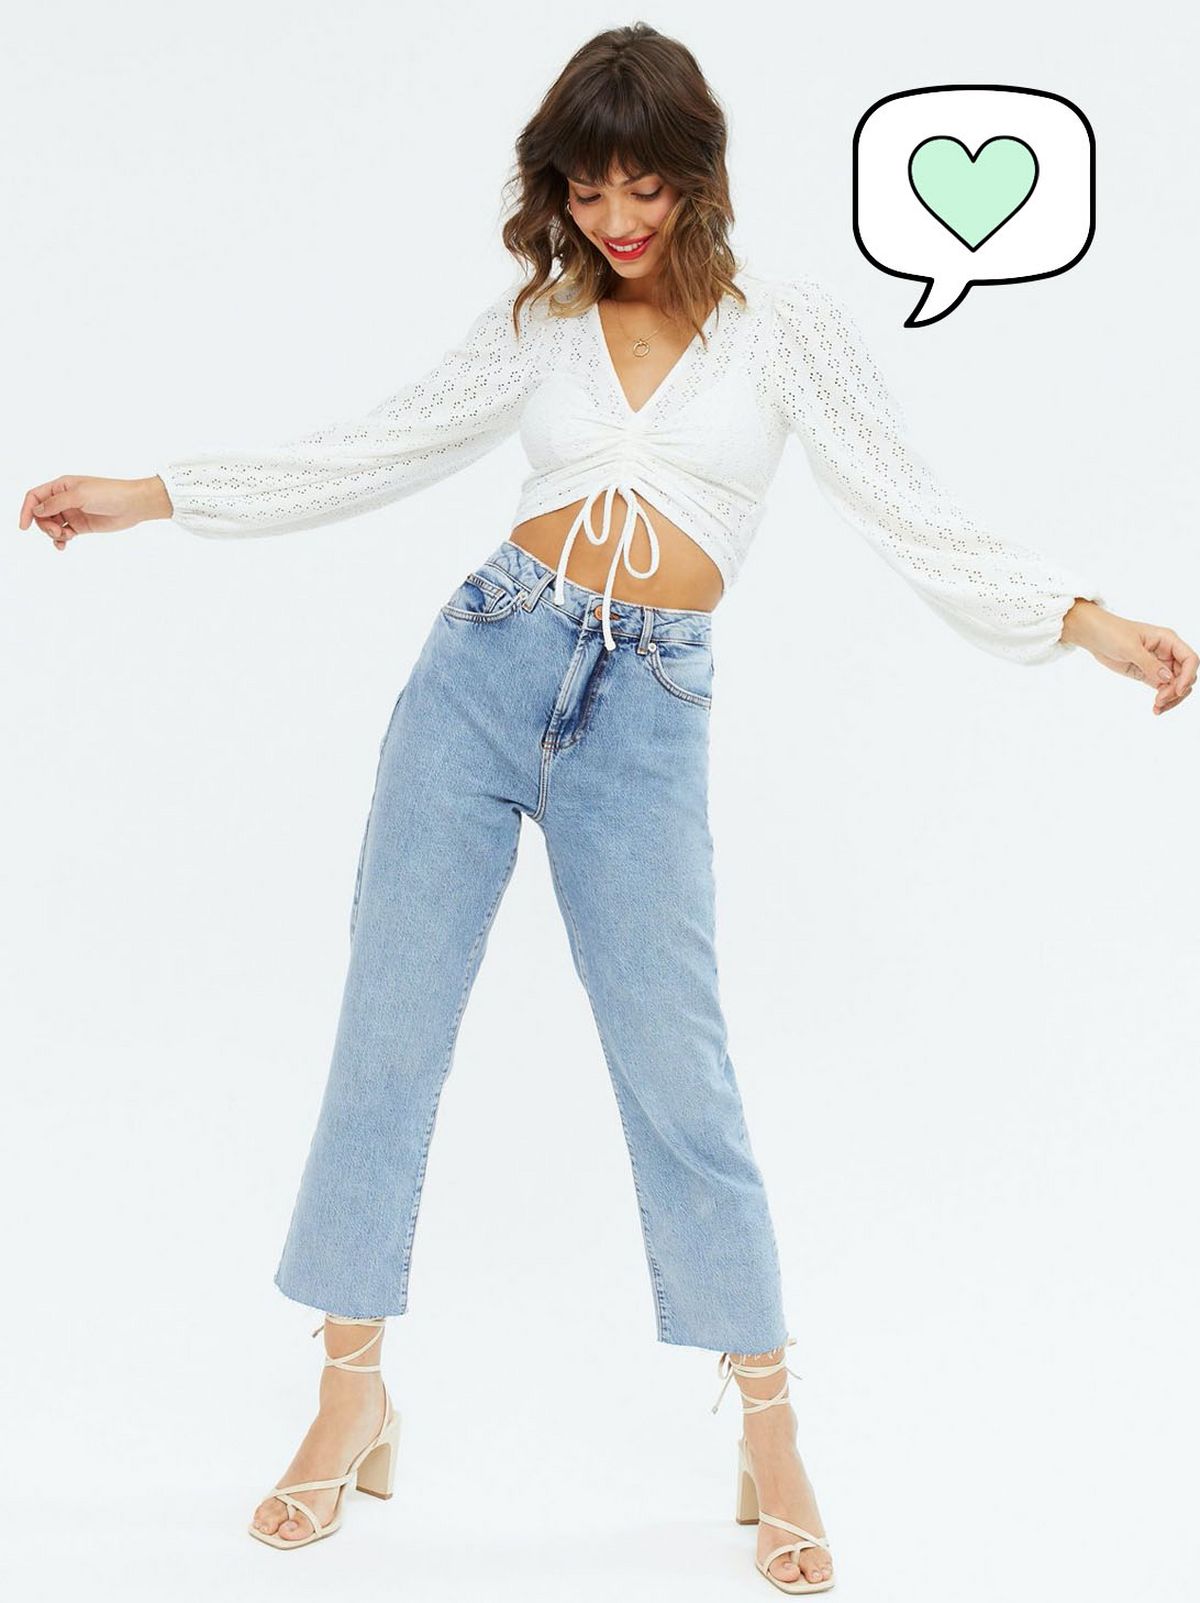 Woman wearing a cream drawstring crop top, blue jeans and heels